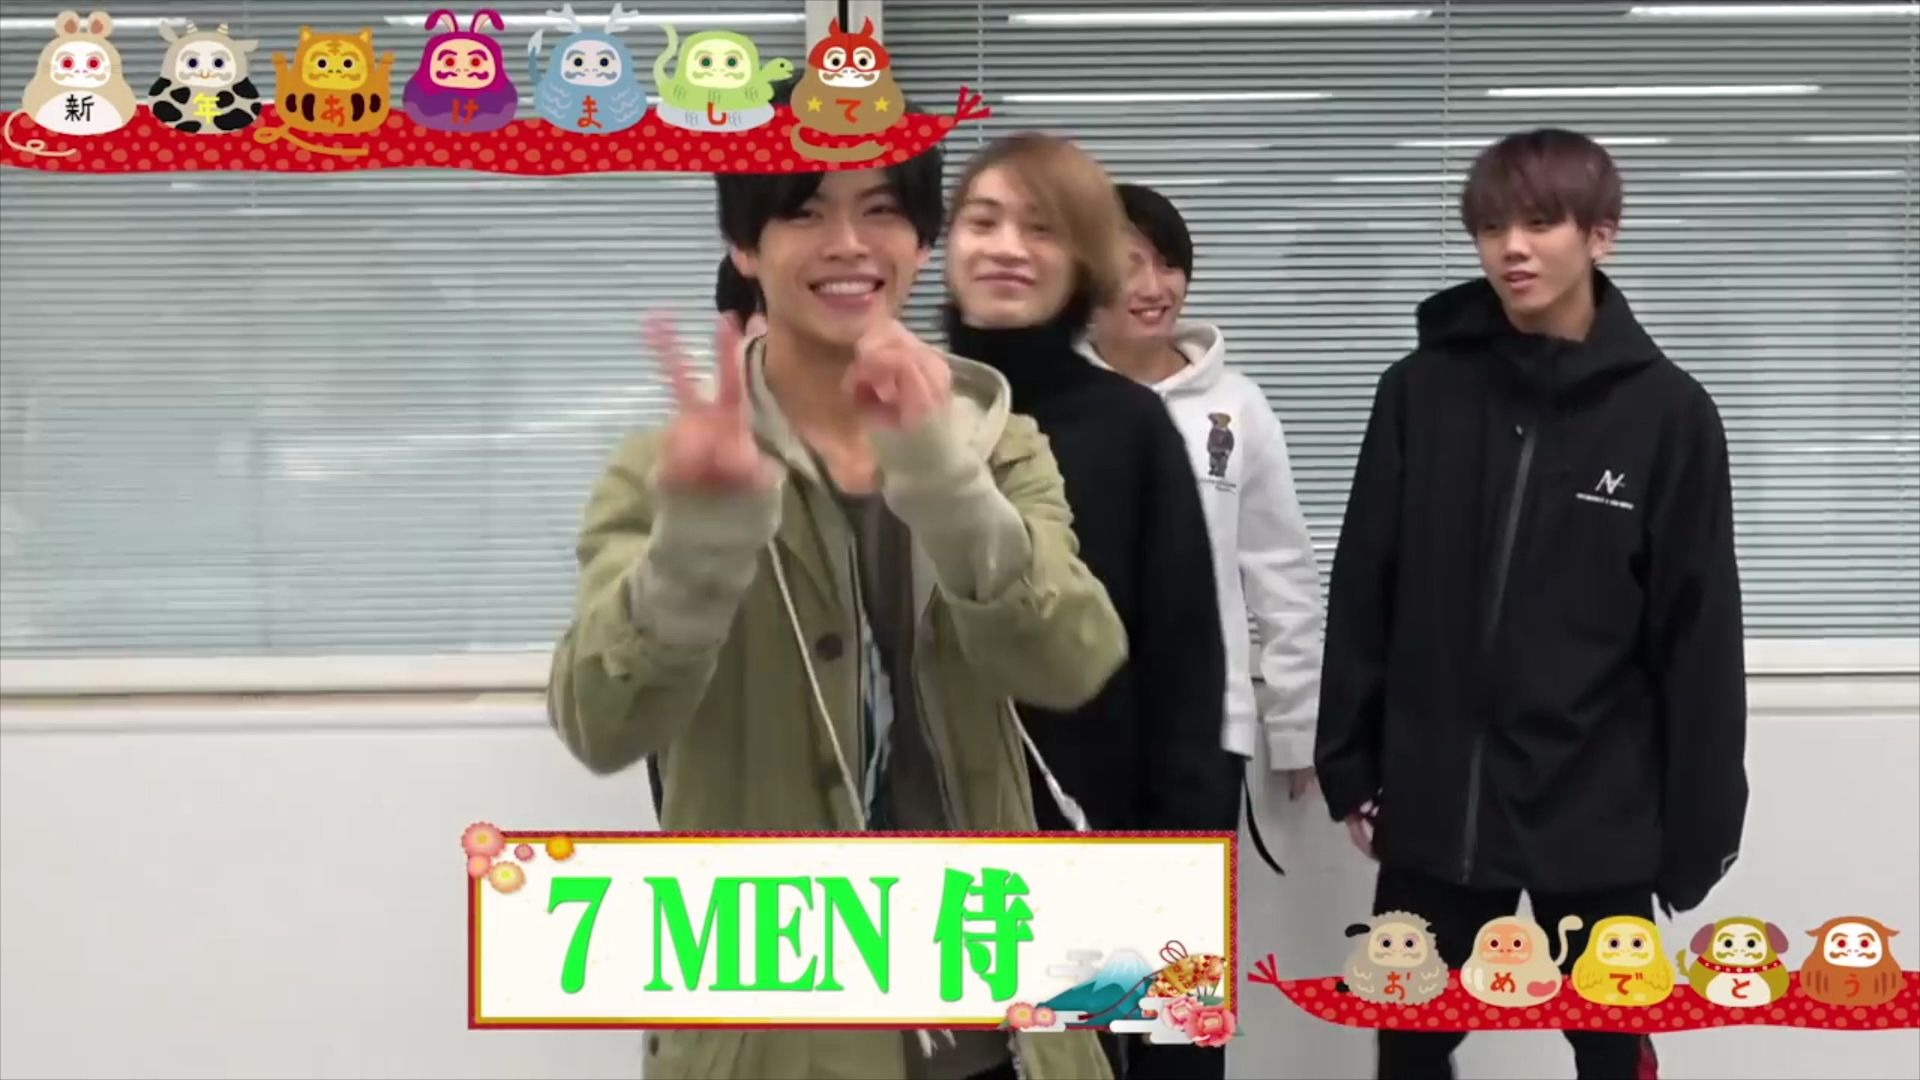 Merry Christmas And Happy New Year From 7 Men 侍 哔哩哔哩 つロ干杯 Bilibili